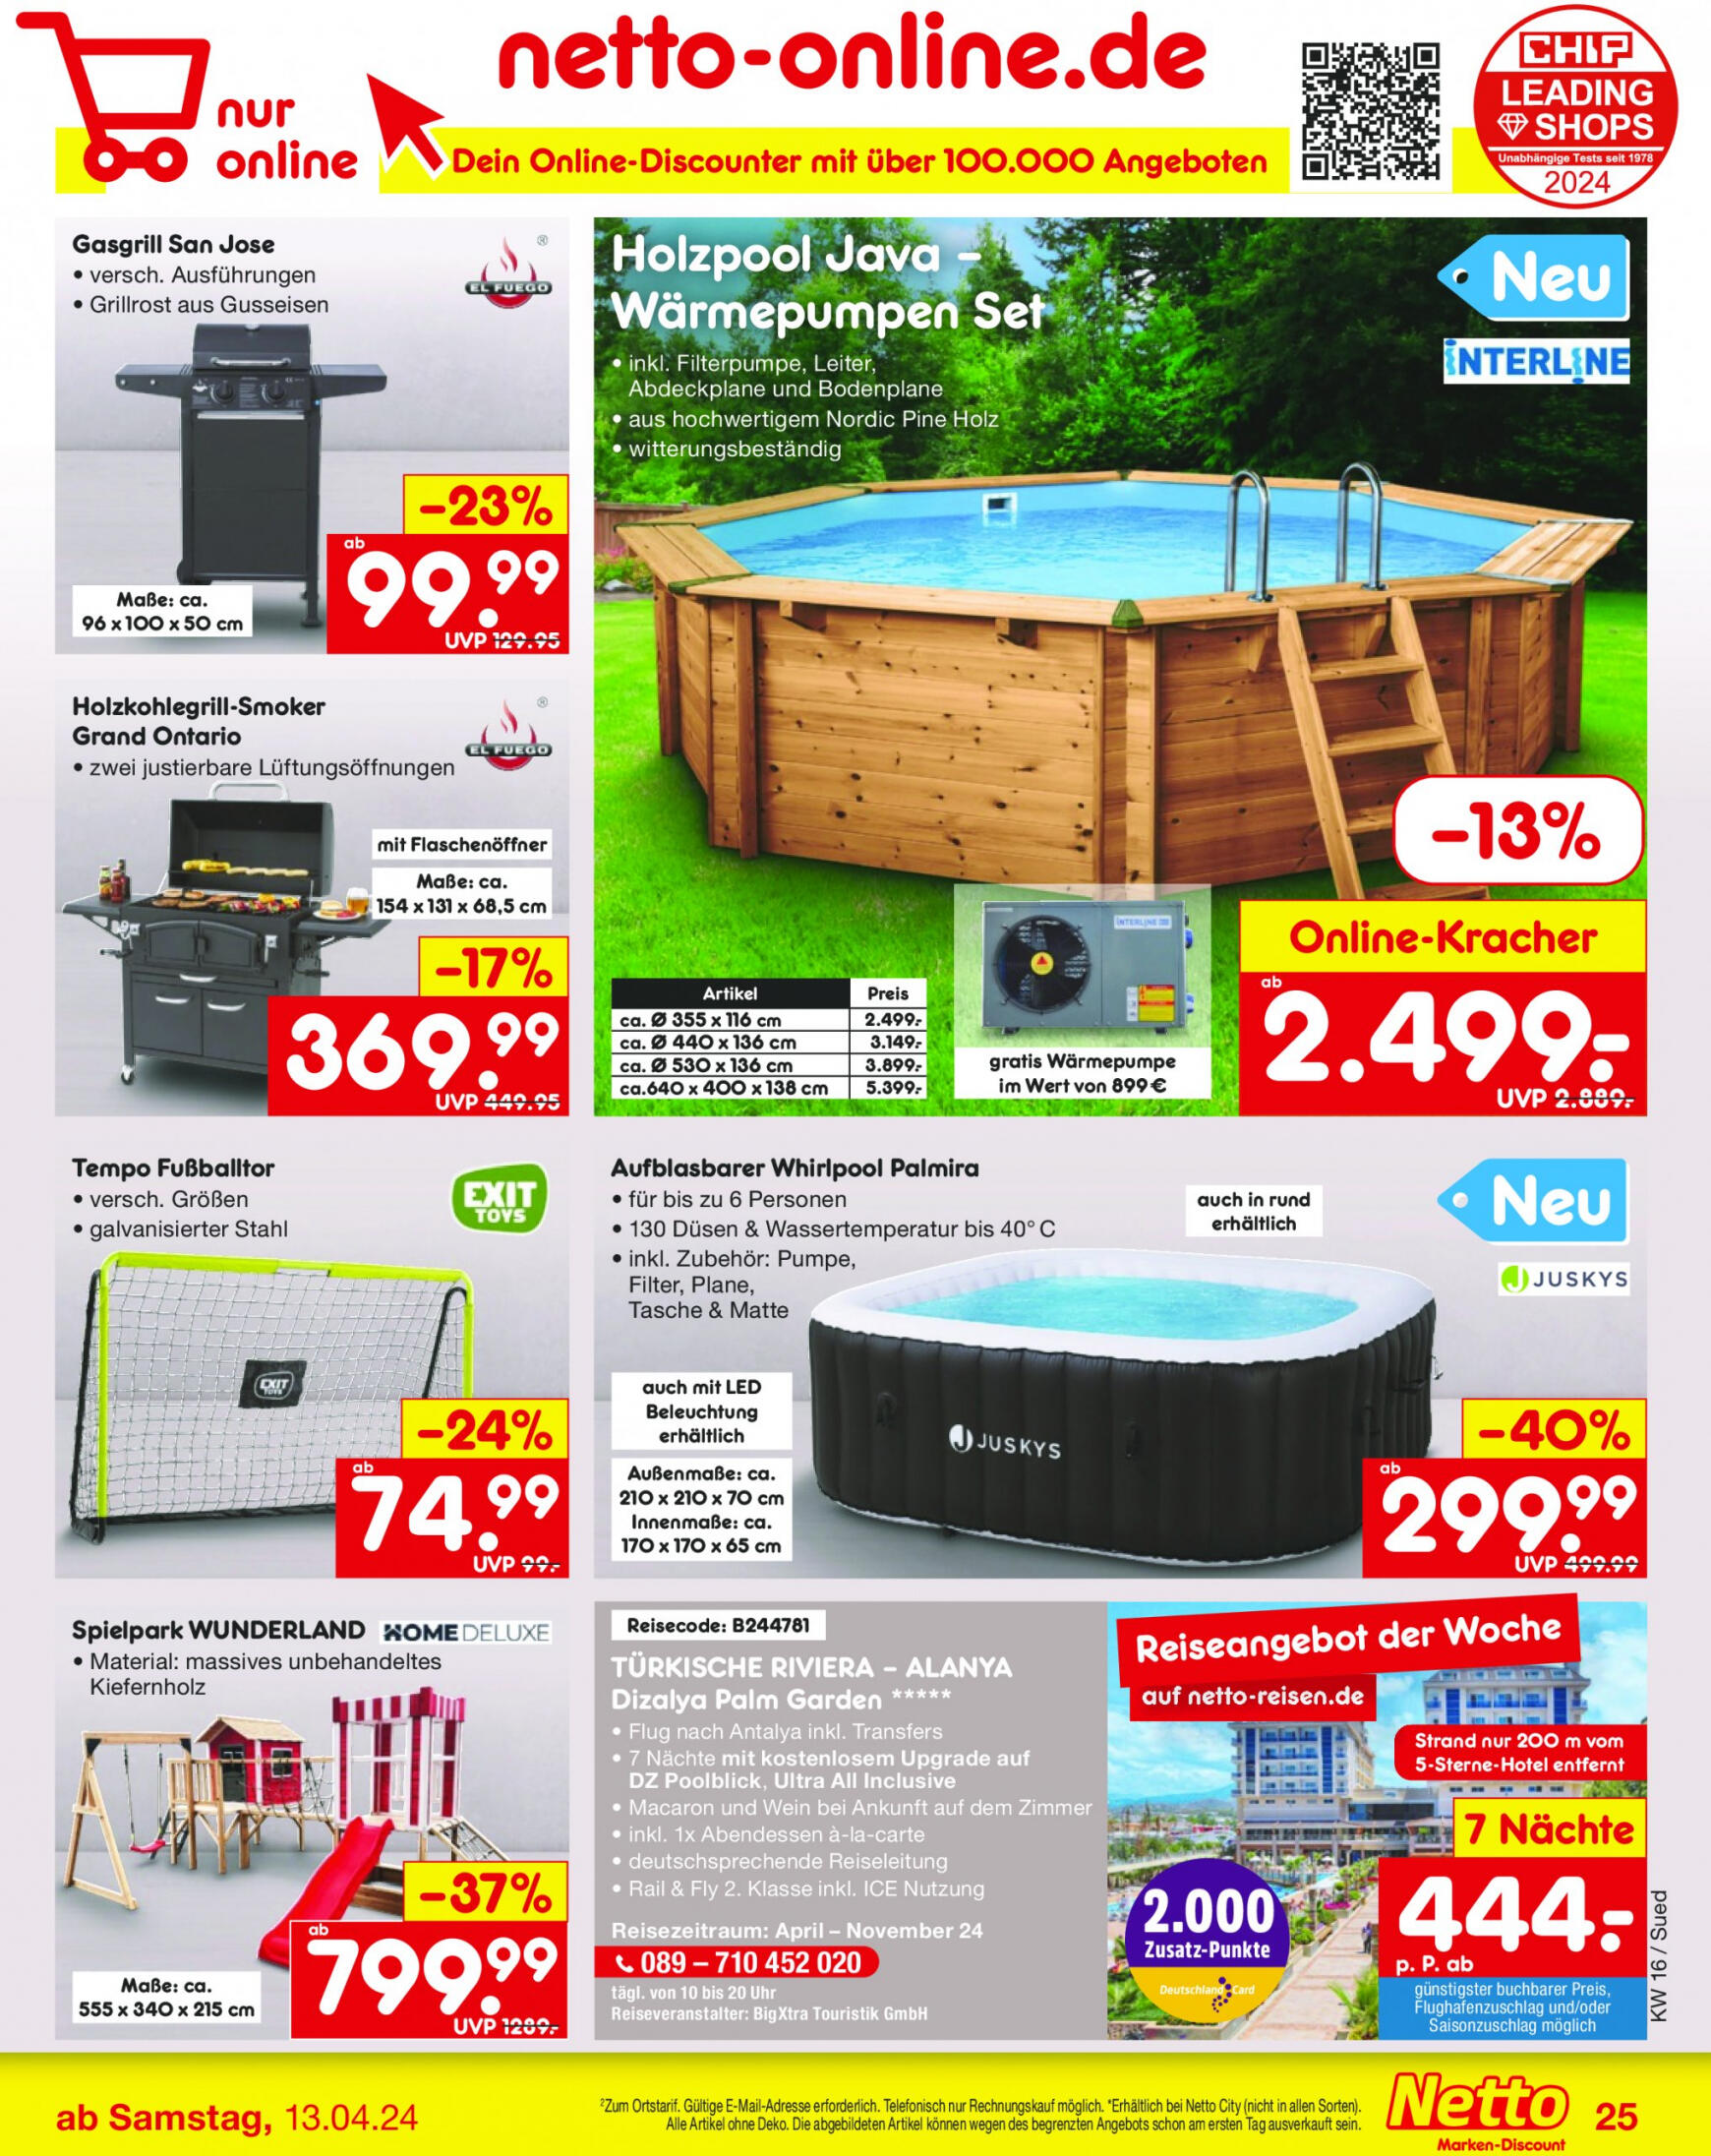 netto - Flyer Netto aktuell 15.04. - 20.04. - page: 31